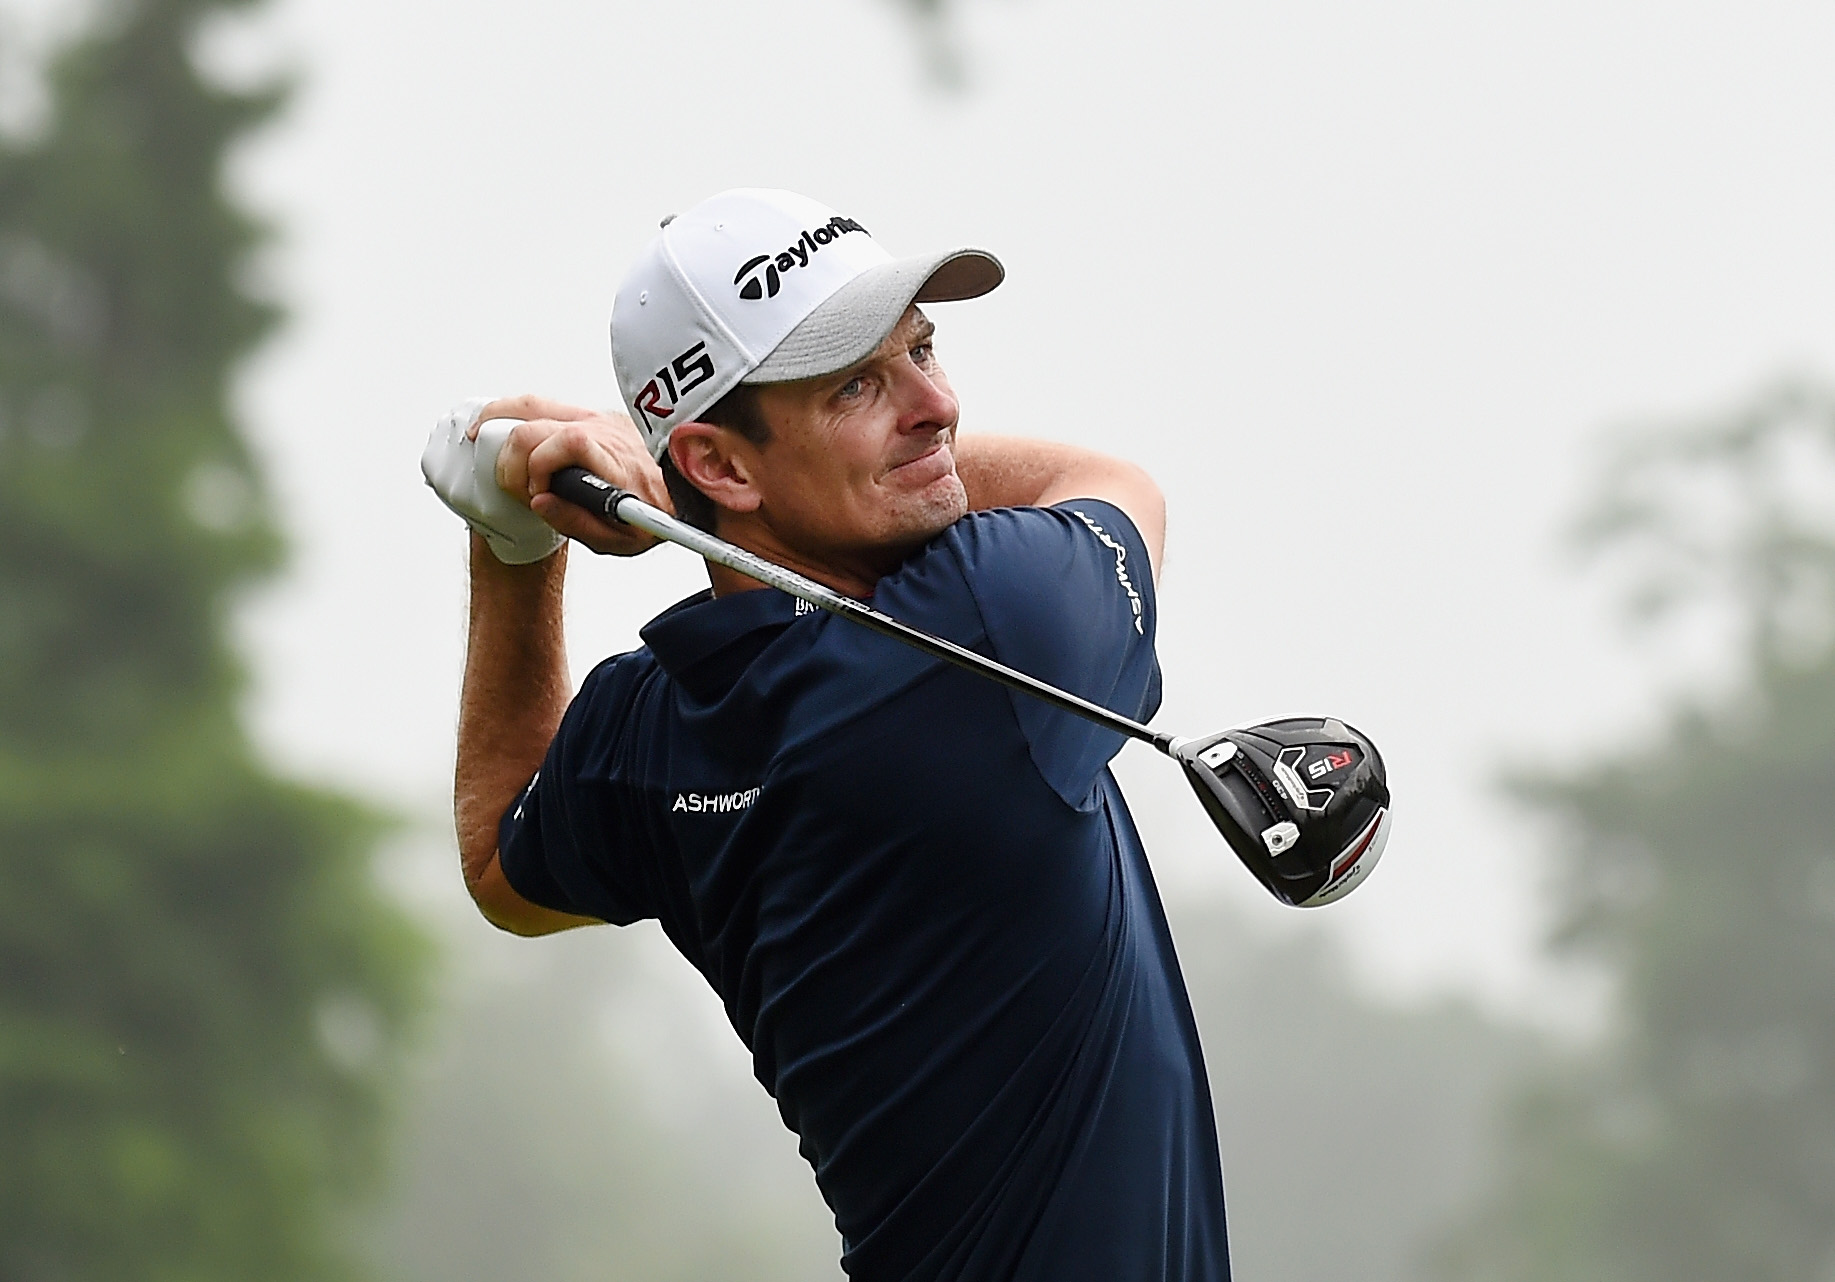 Rose wielded TaylorMade's R15 driver in New Orleans (Photo: Getty Images)